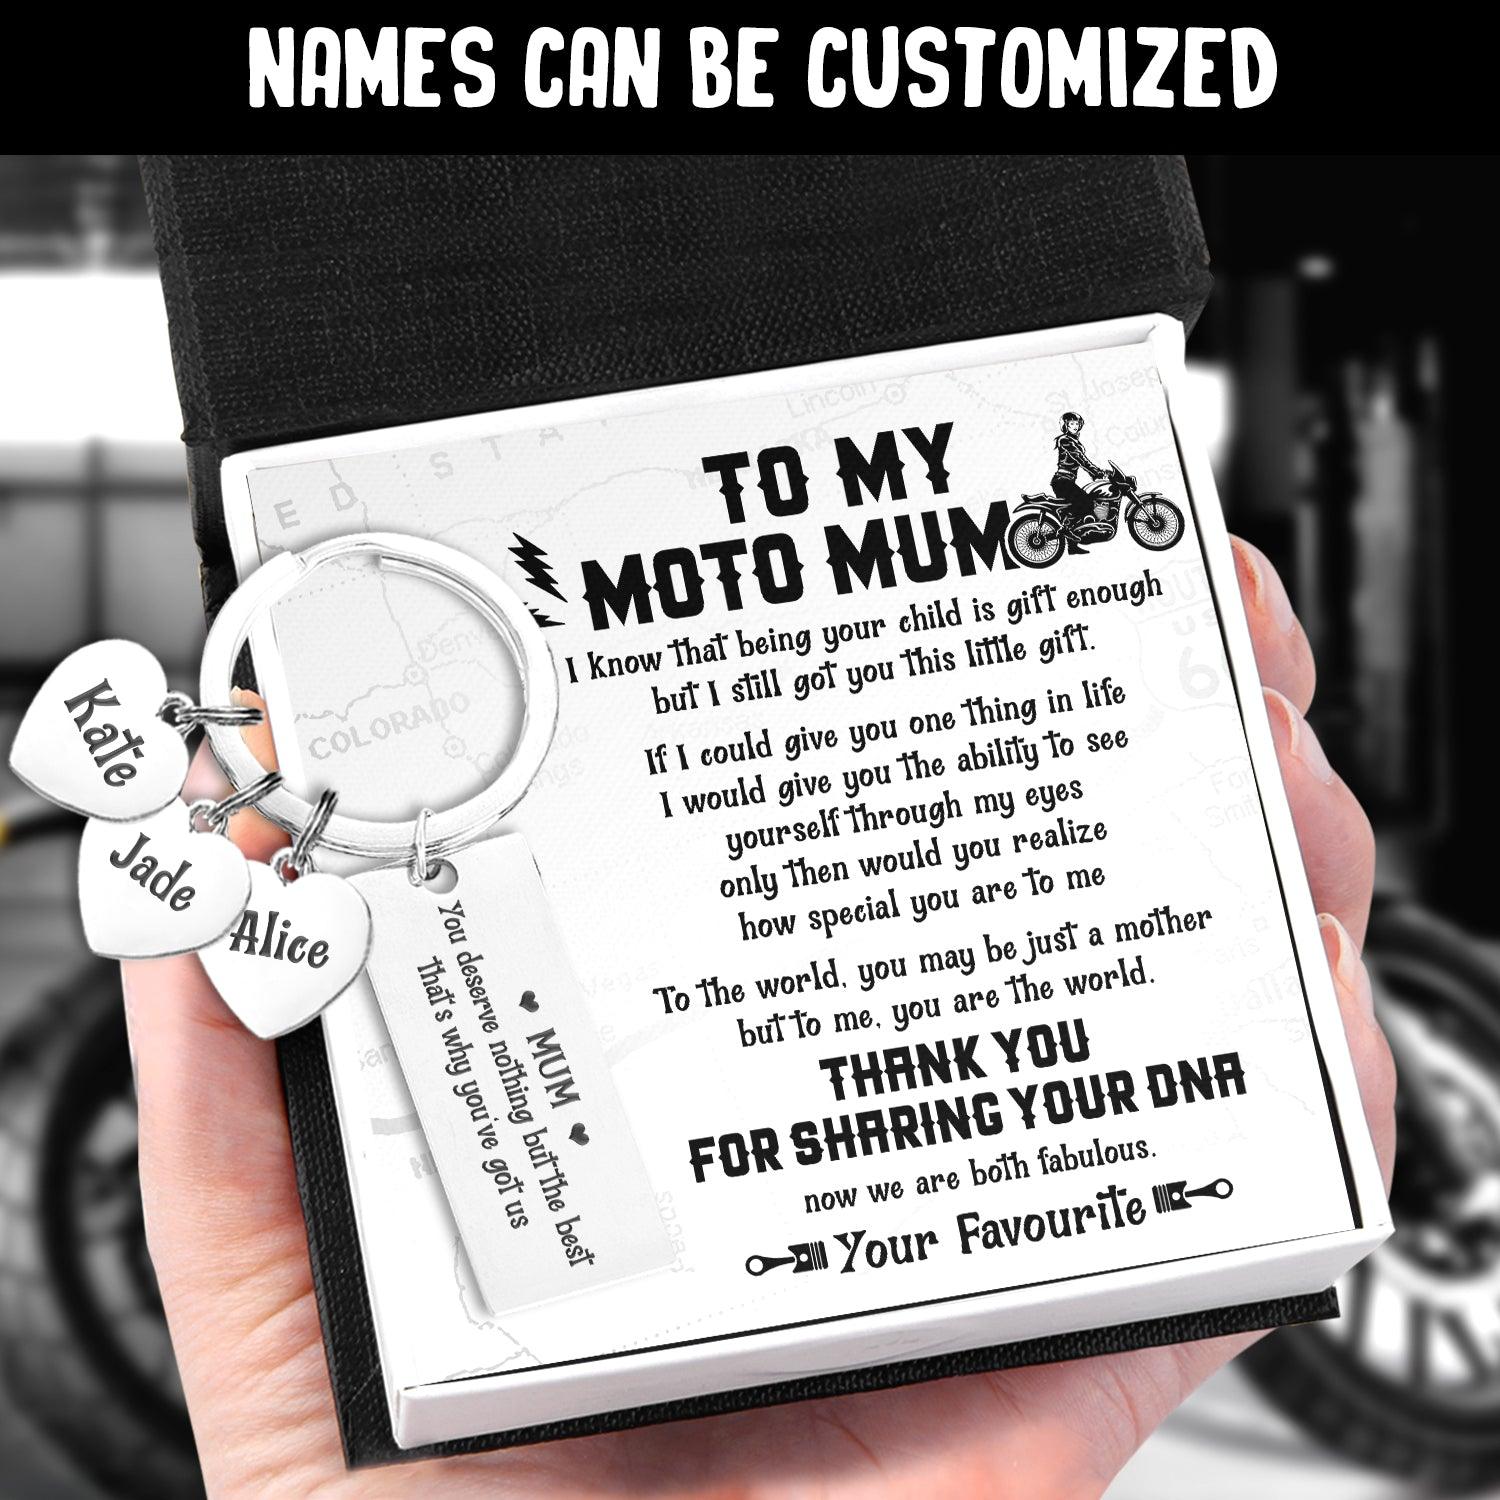 Personalised Keychain - Biker - To My Moto Mum - Thank You For Sharing Your DNA - Augkc19002 - Gifts Holder